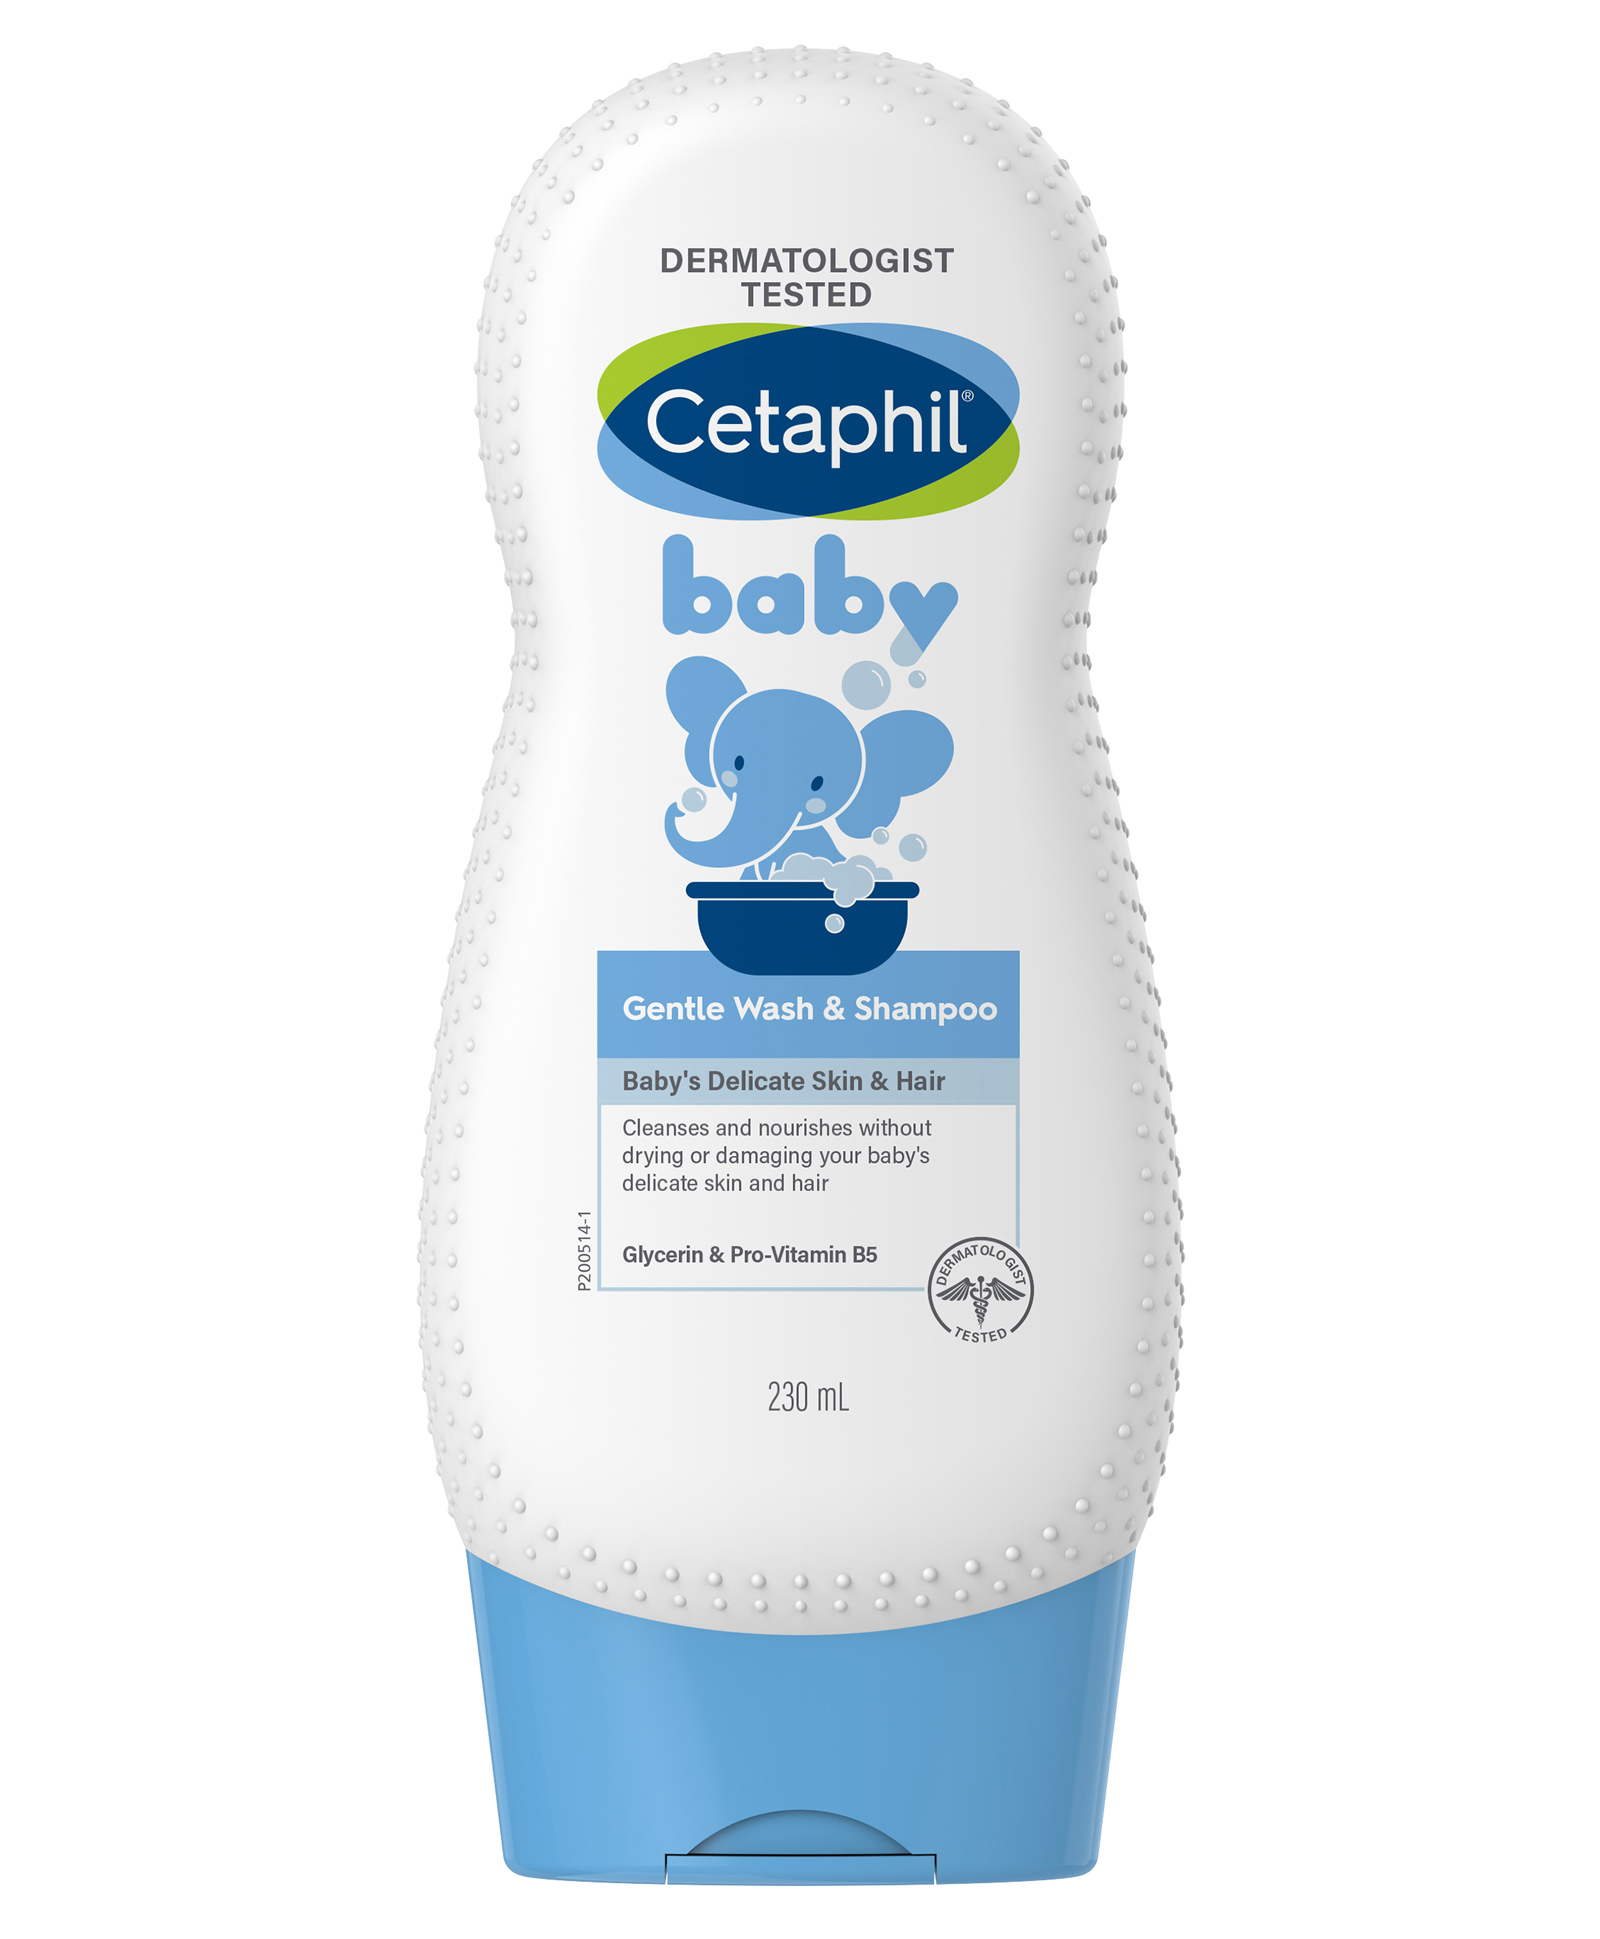 cetaphil baby bath and wash price